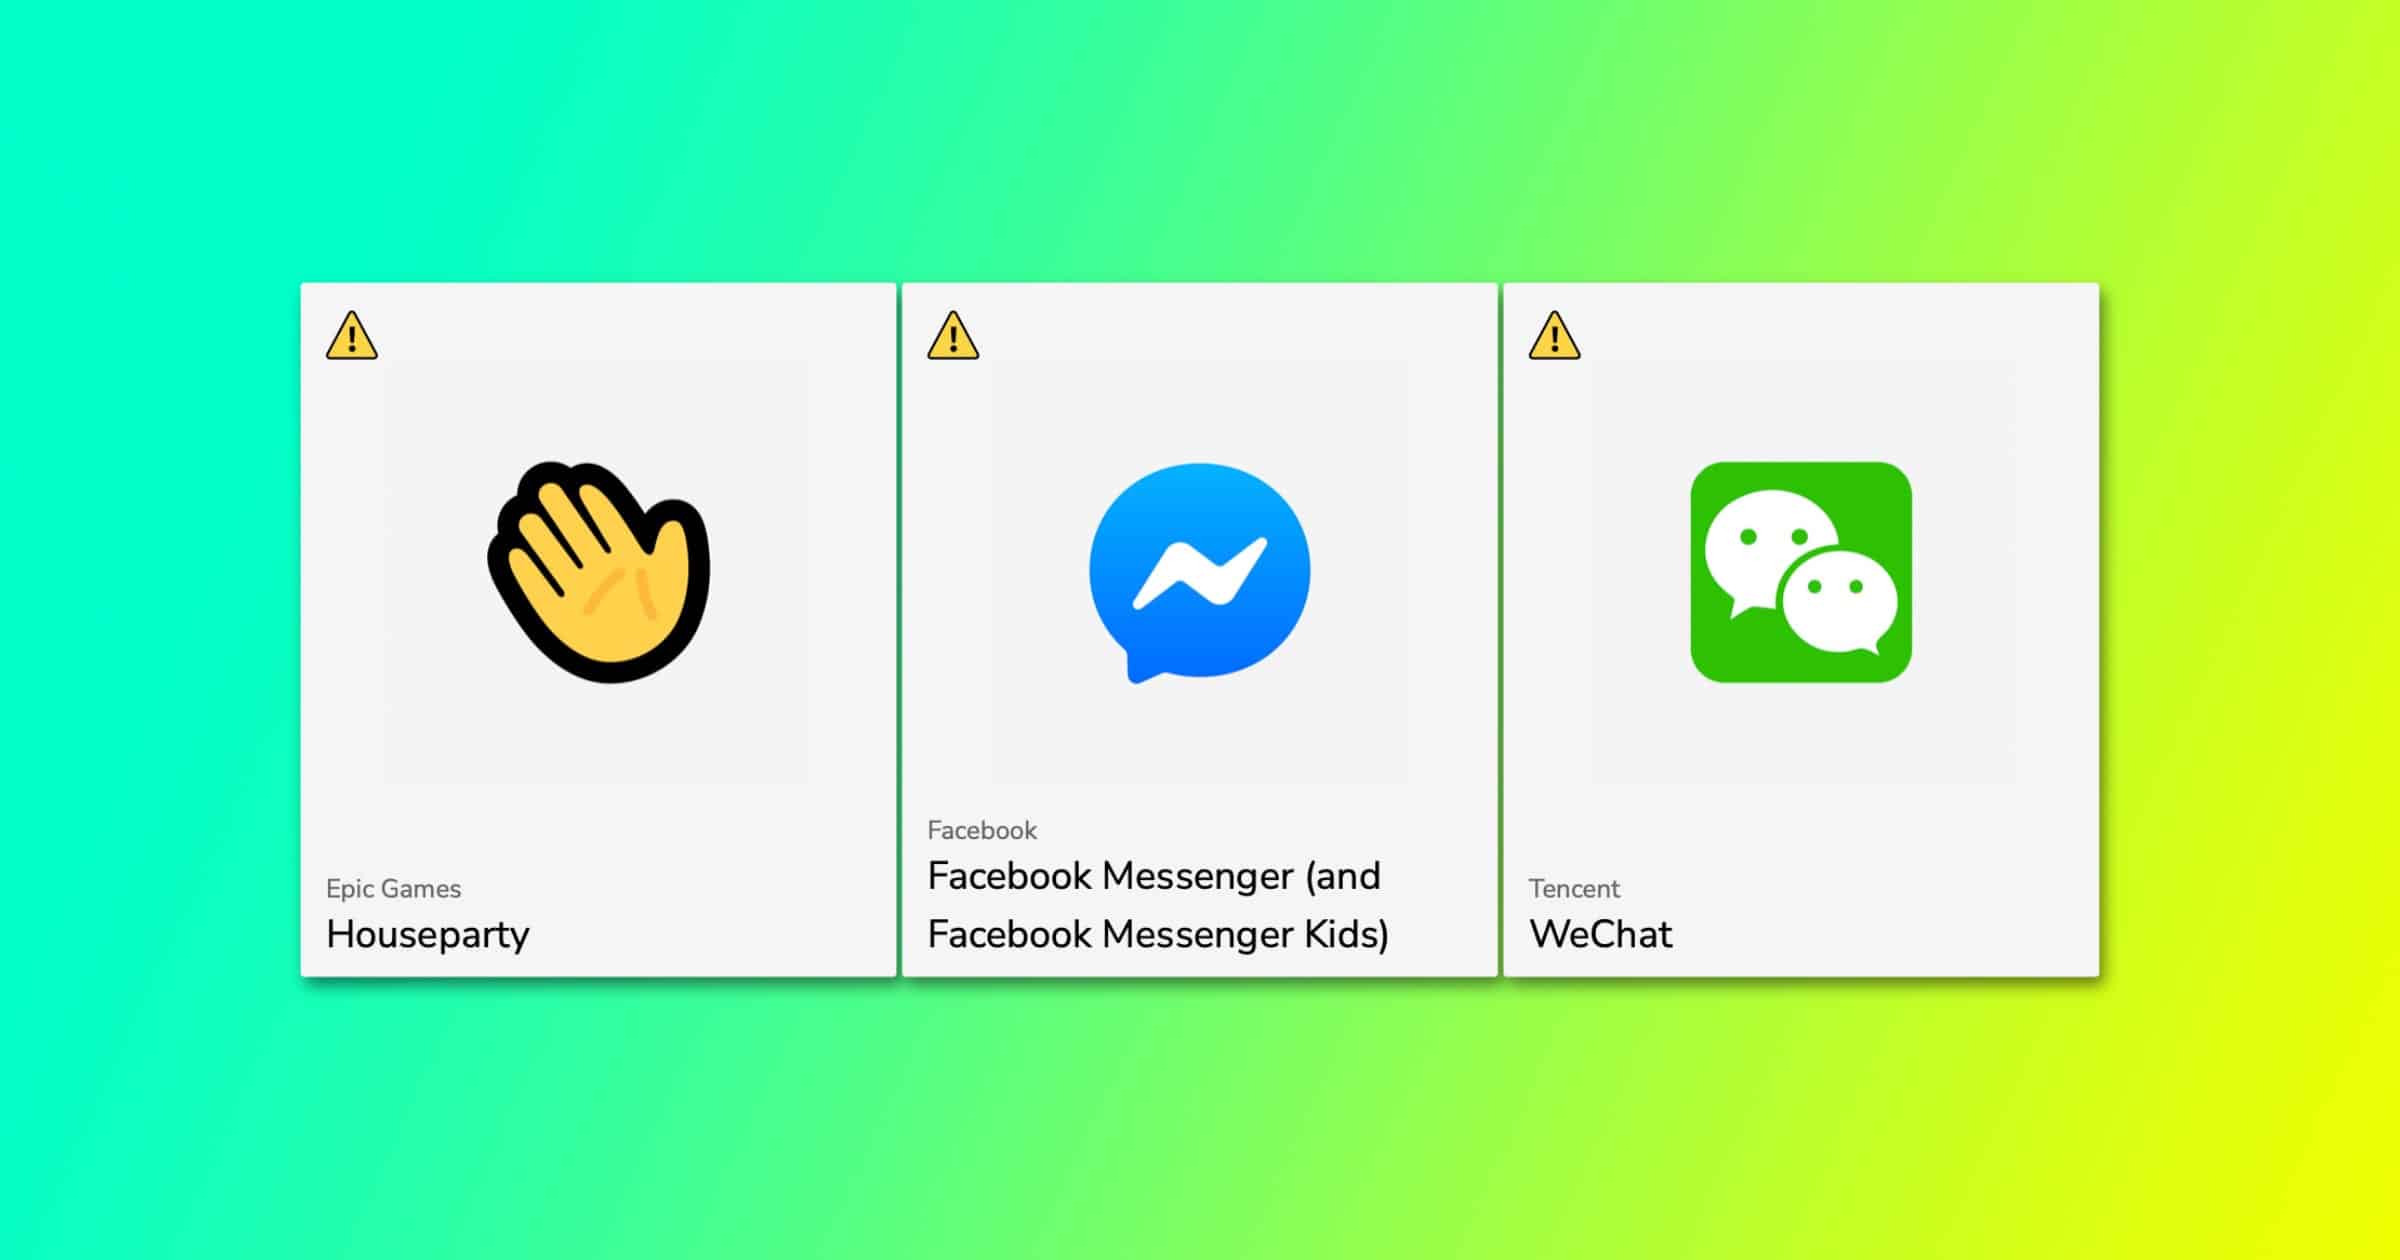 Mozilla Adds Facebook Messenger, Houseparty, and WeChat to ‘Privacy Not Included’ Guide